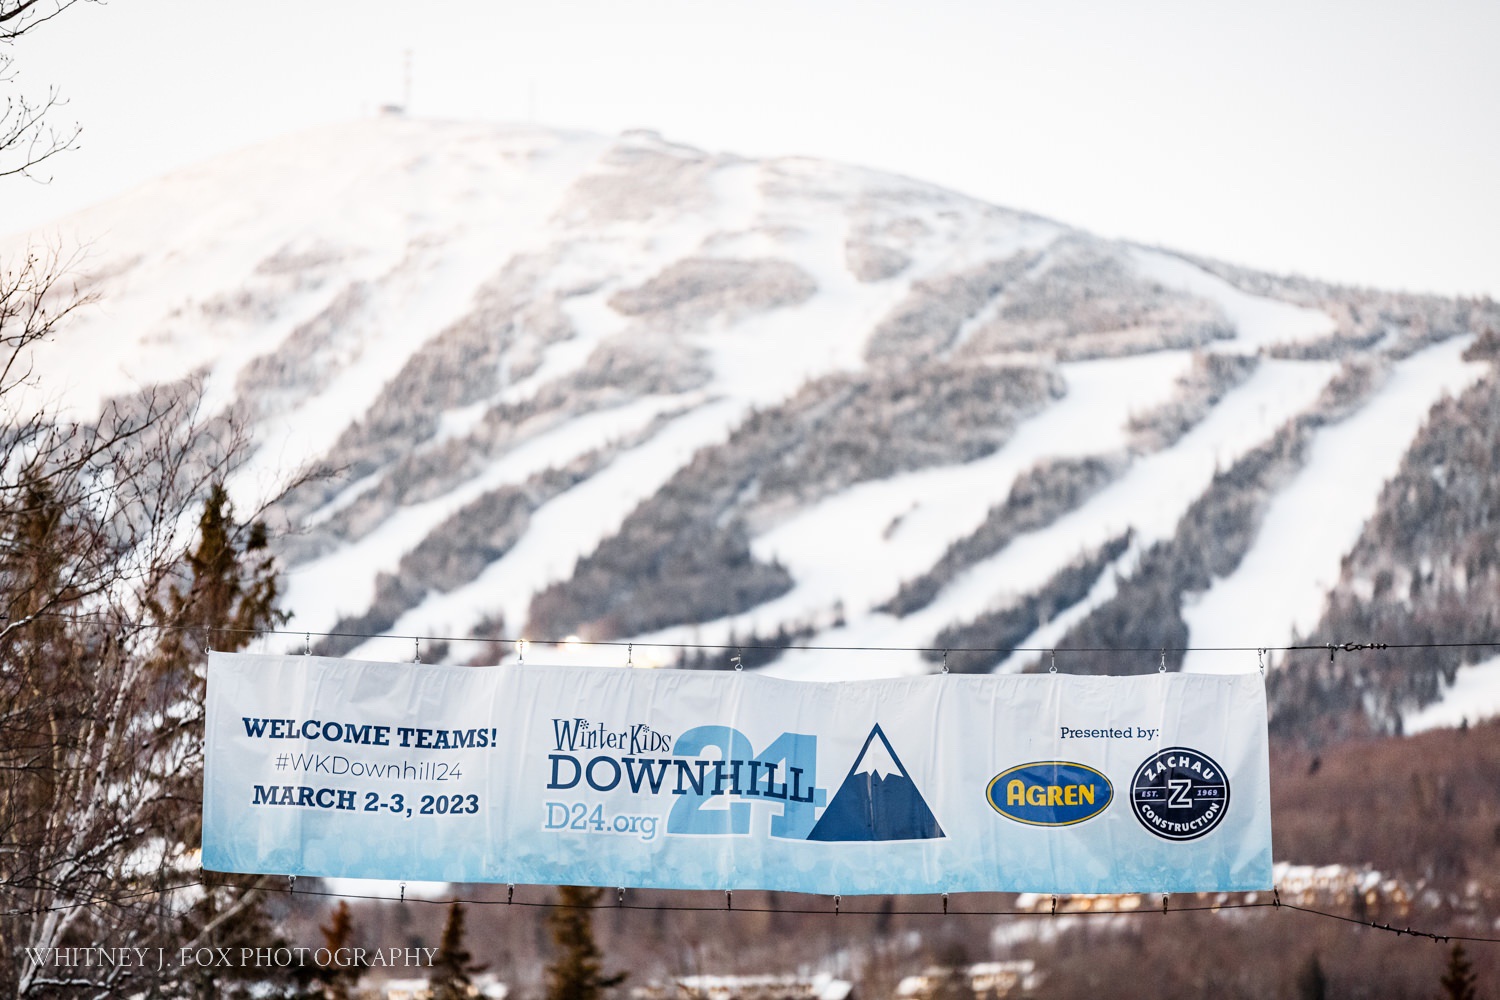 11th Annual Downhill 24 ski and snowboard challenge and fundraiser to benefit WinterKids Held at Sugarloaf Mountain in Carrabassett Valley March 2 3, 2023 for the 8th consecutive year, $950,056 was raised for the non profit’s most important annual fund